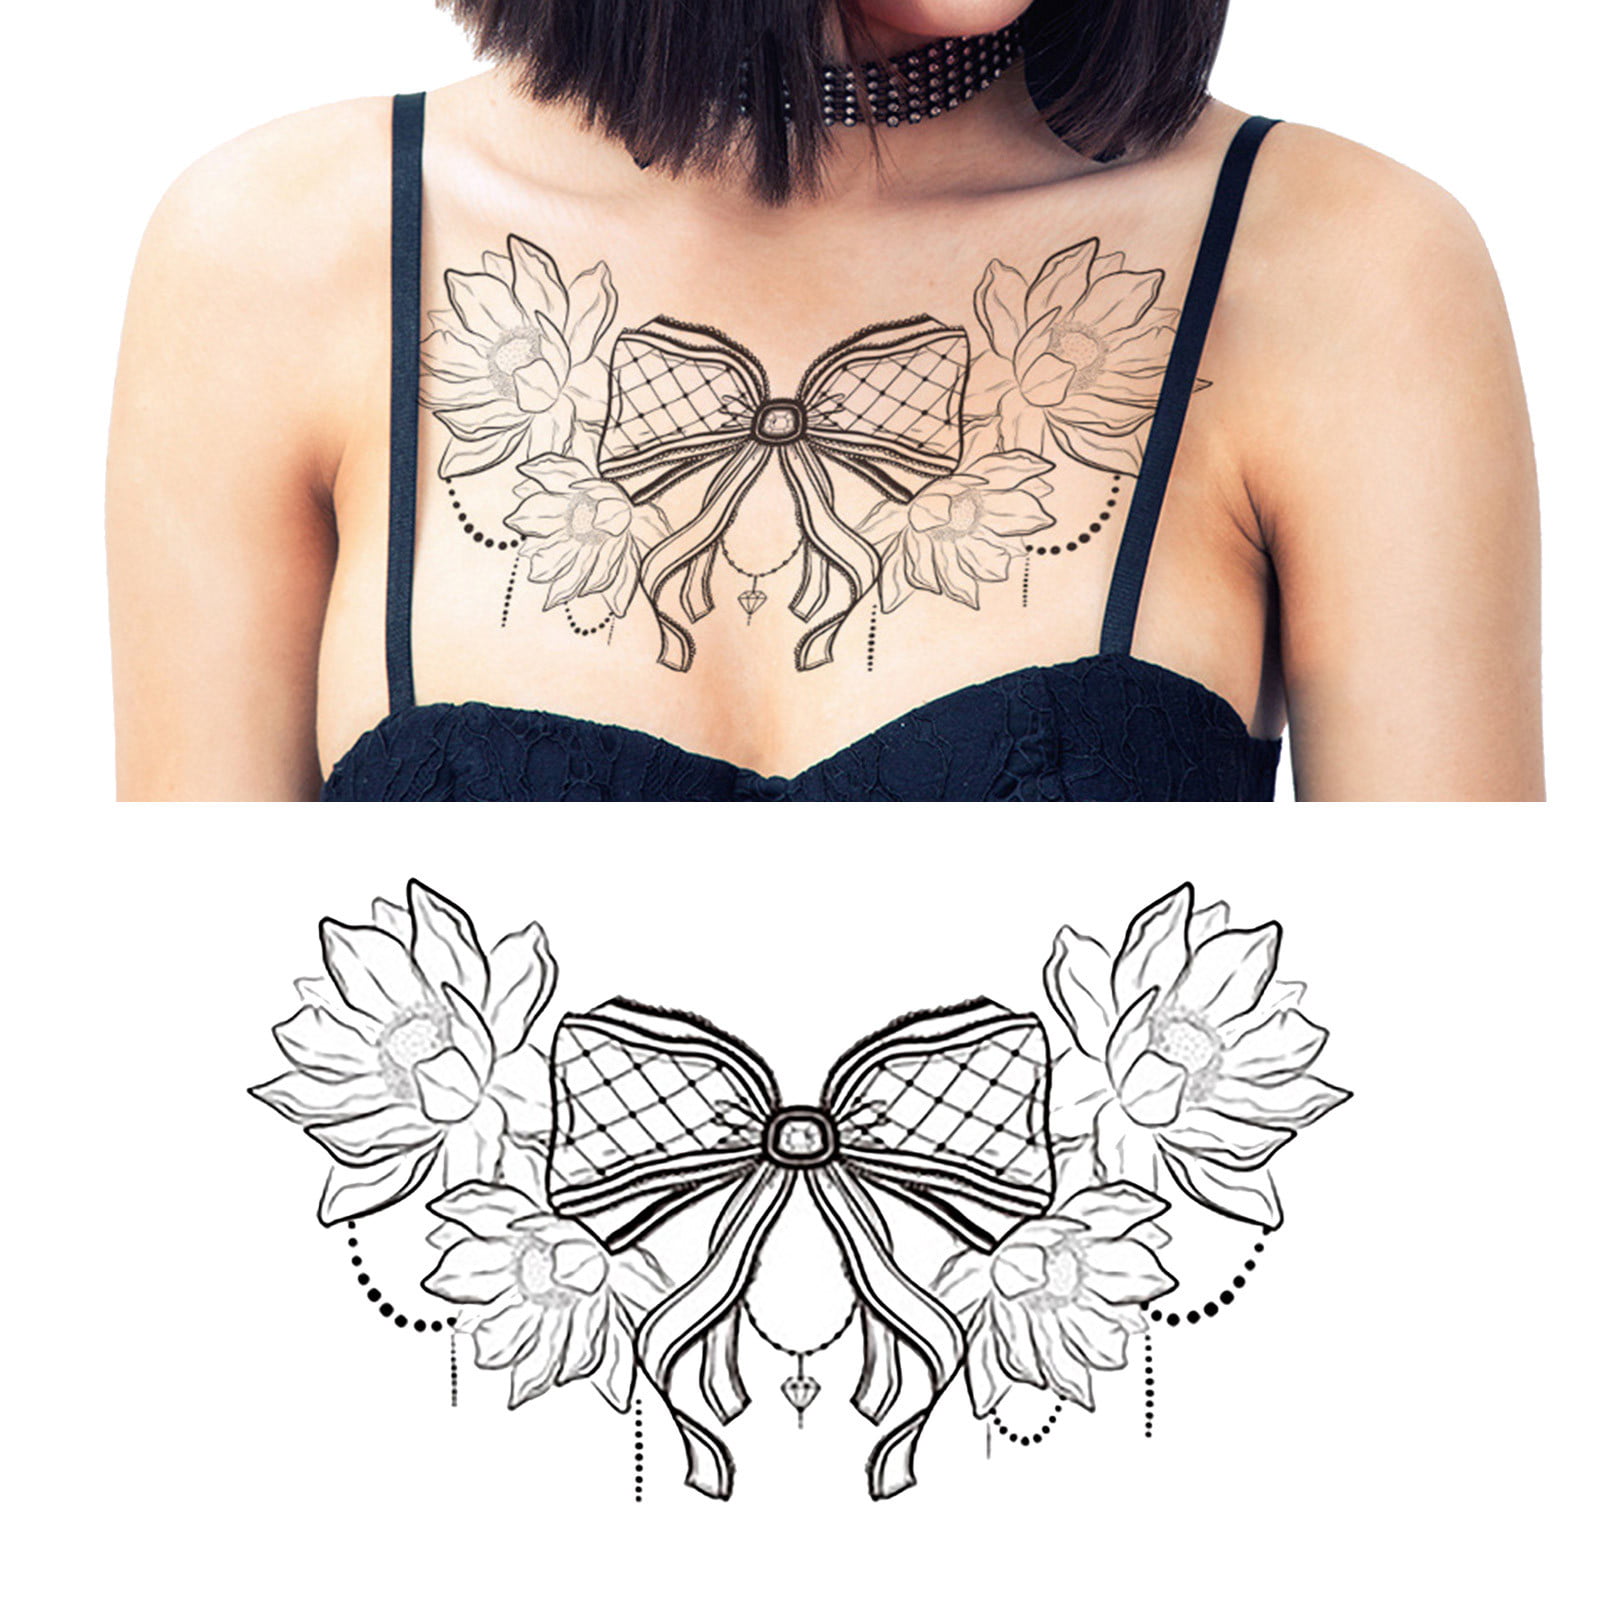 22 Sternum and Chest Temporary Tattoos ideas  tattoos temporary tattoos  pattern decal